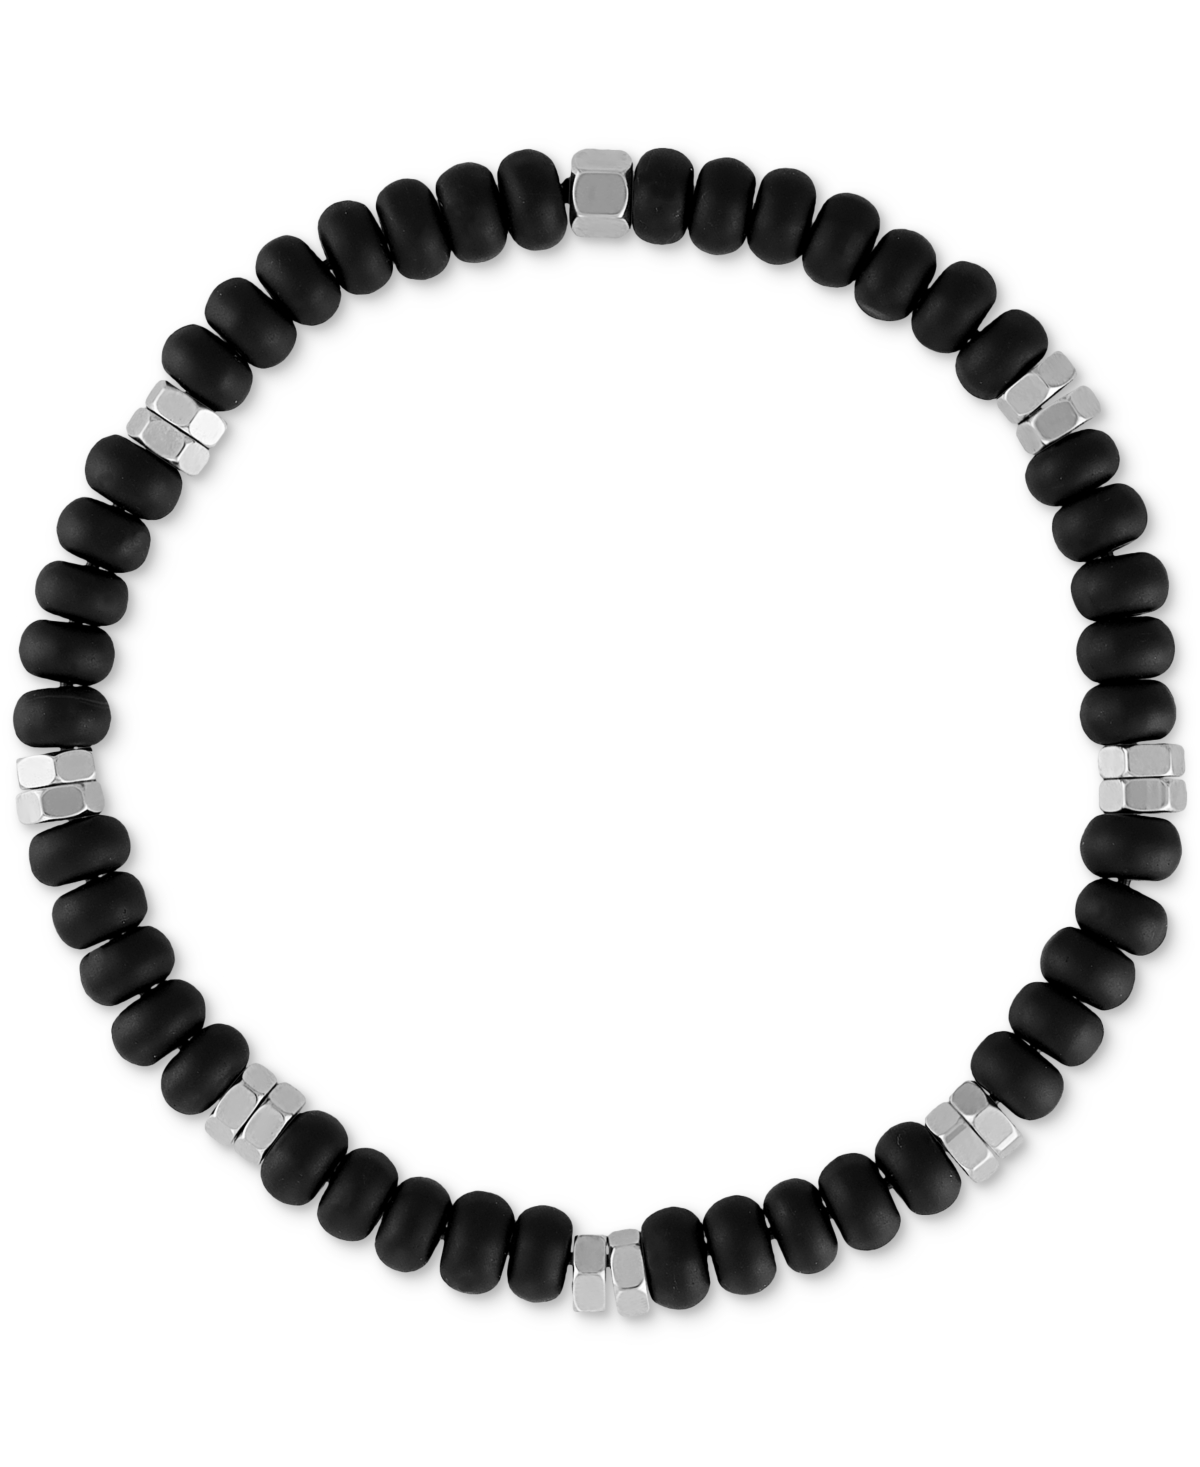 Onyx Bead Stretch Bracelet in Sterling Silver (Also in Sodalite), Created for Macy's - Onyx